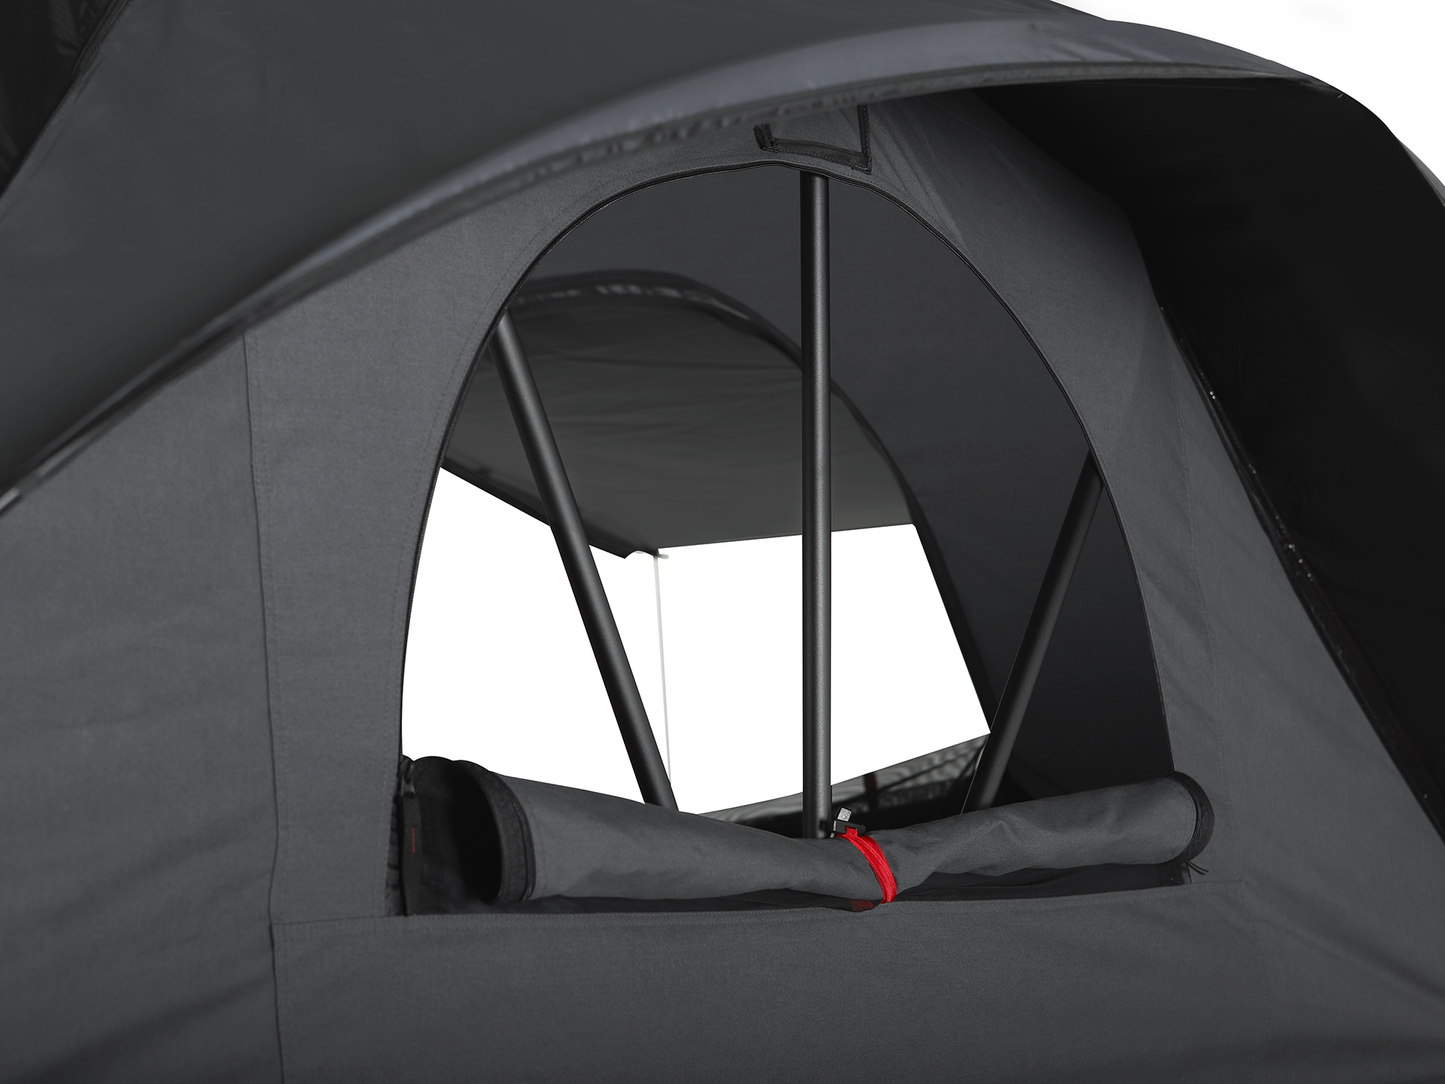 X-COVER 2.0 - WINTER SPECIAL! - FREE INNER TENT!